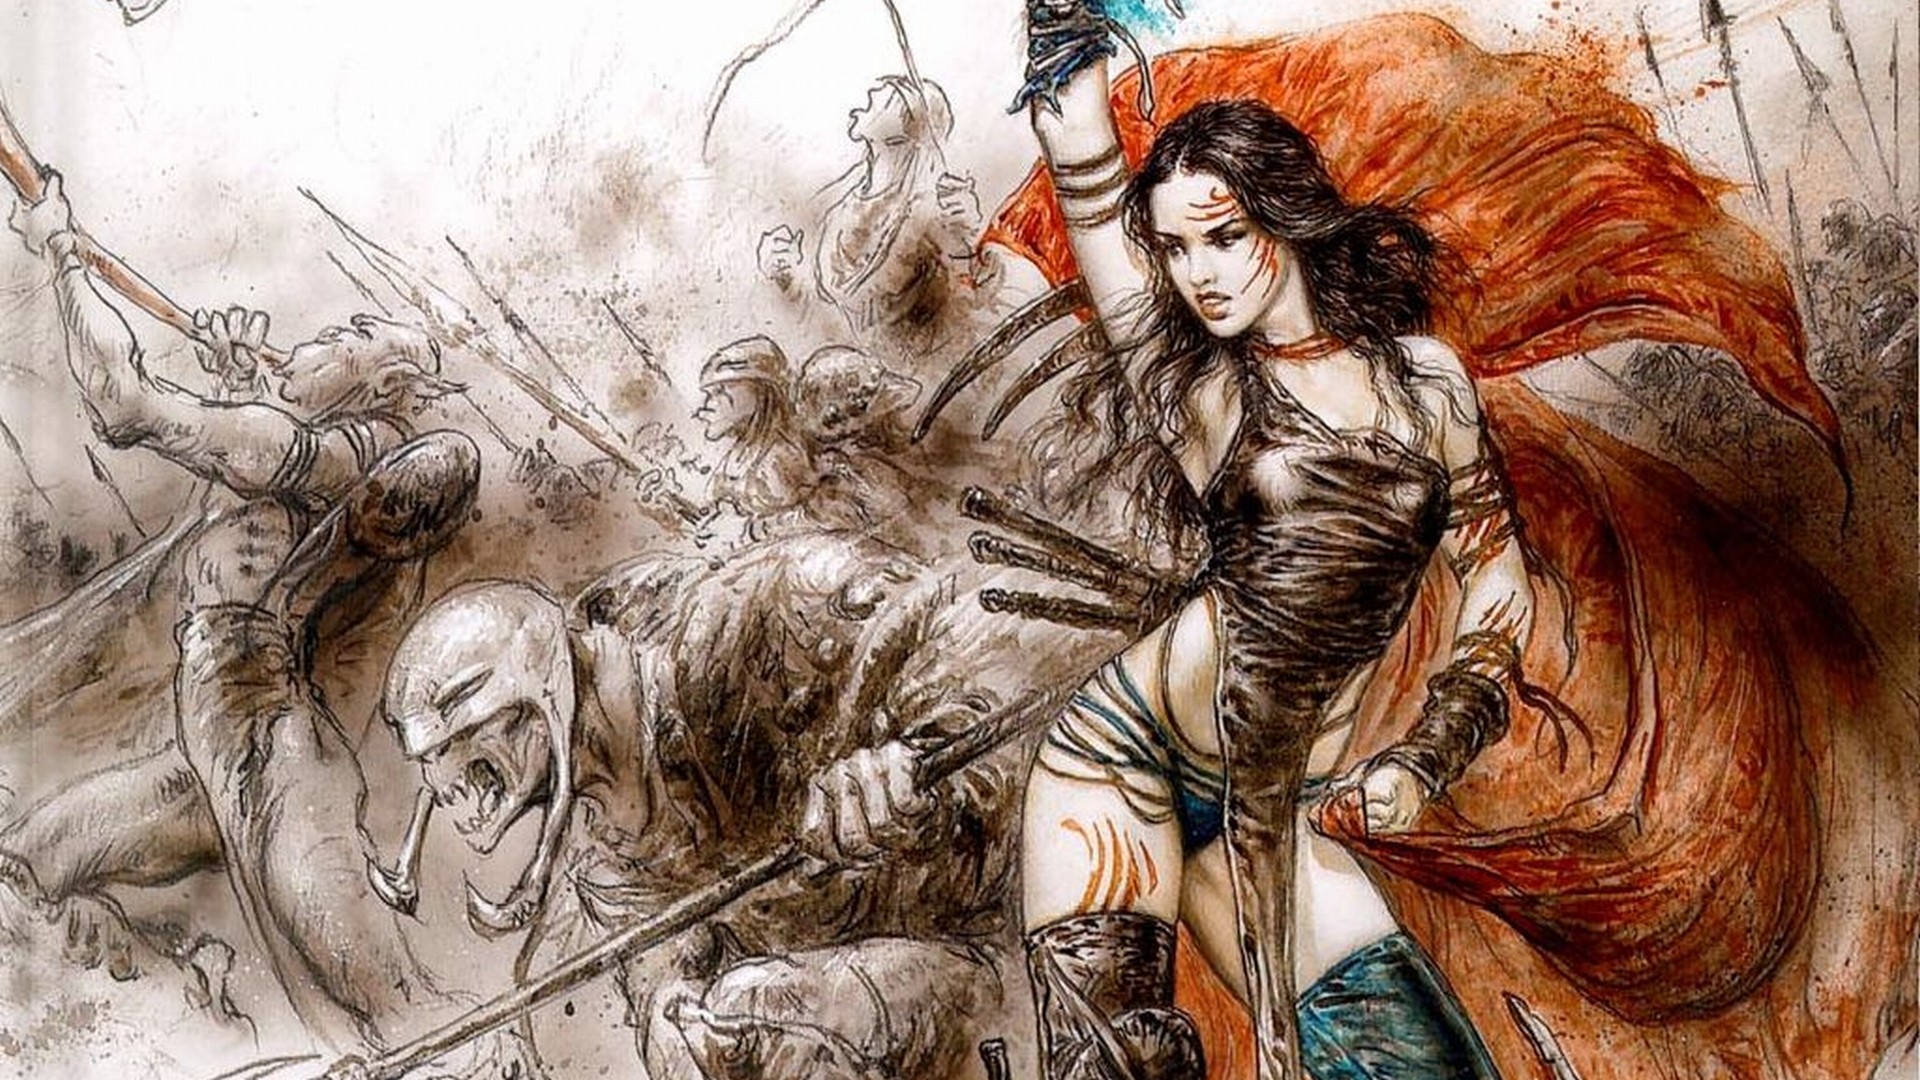 1920x1080 Luis Royo images Female Warrior HD wallpaper and background photos